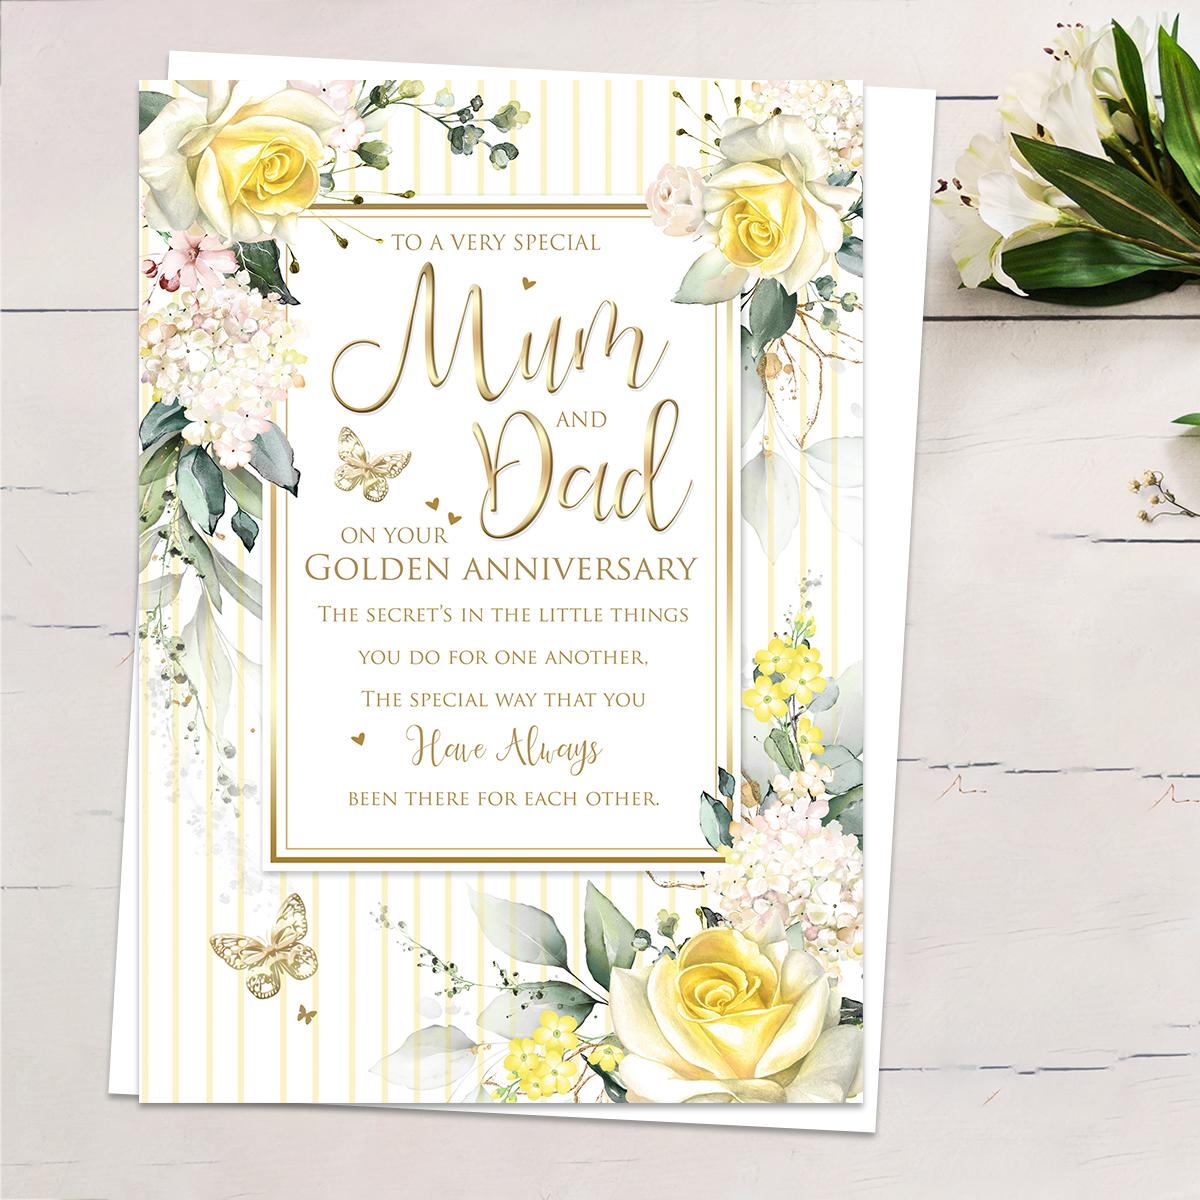 ' To A Very Special Mum And Dad On Your Golden Anniversary' Featuring Lemon Roses And Gold Foiled Butterflies. Complete With White Envelope